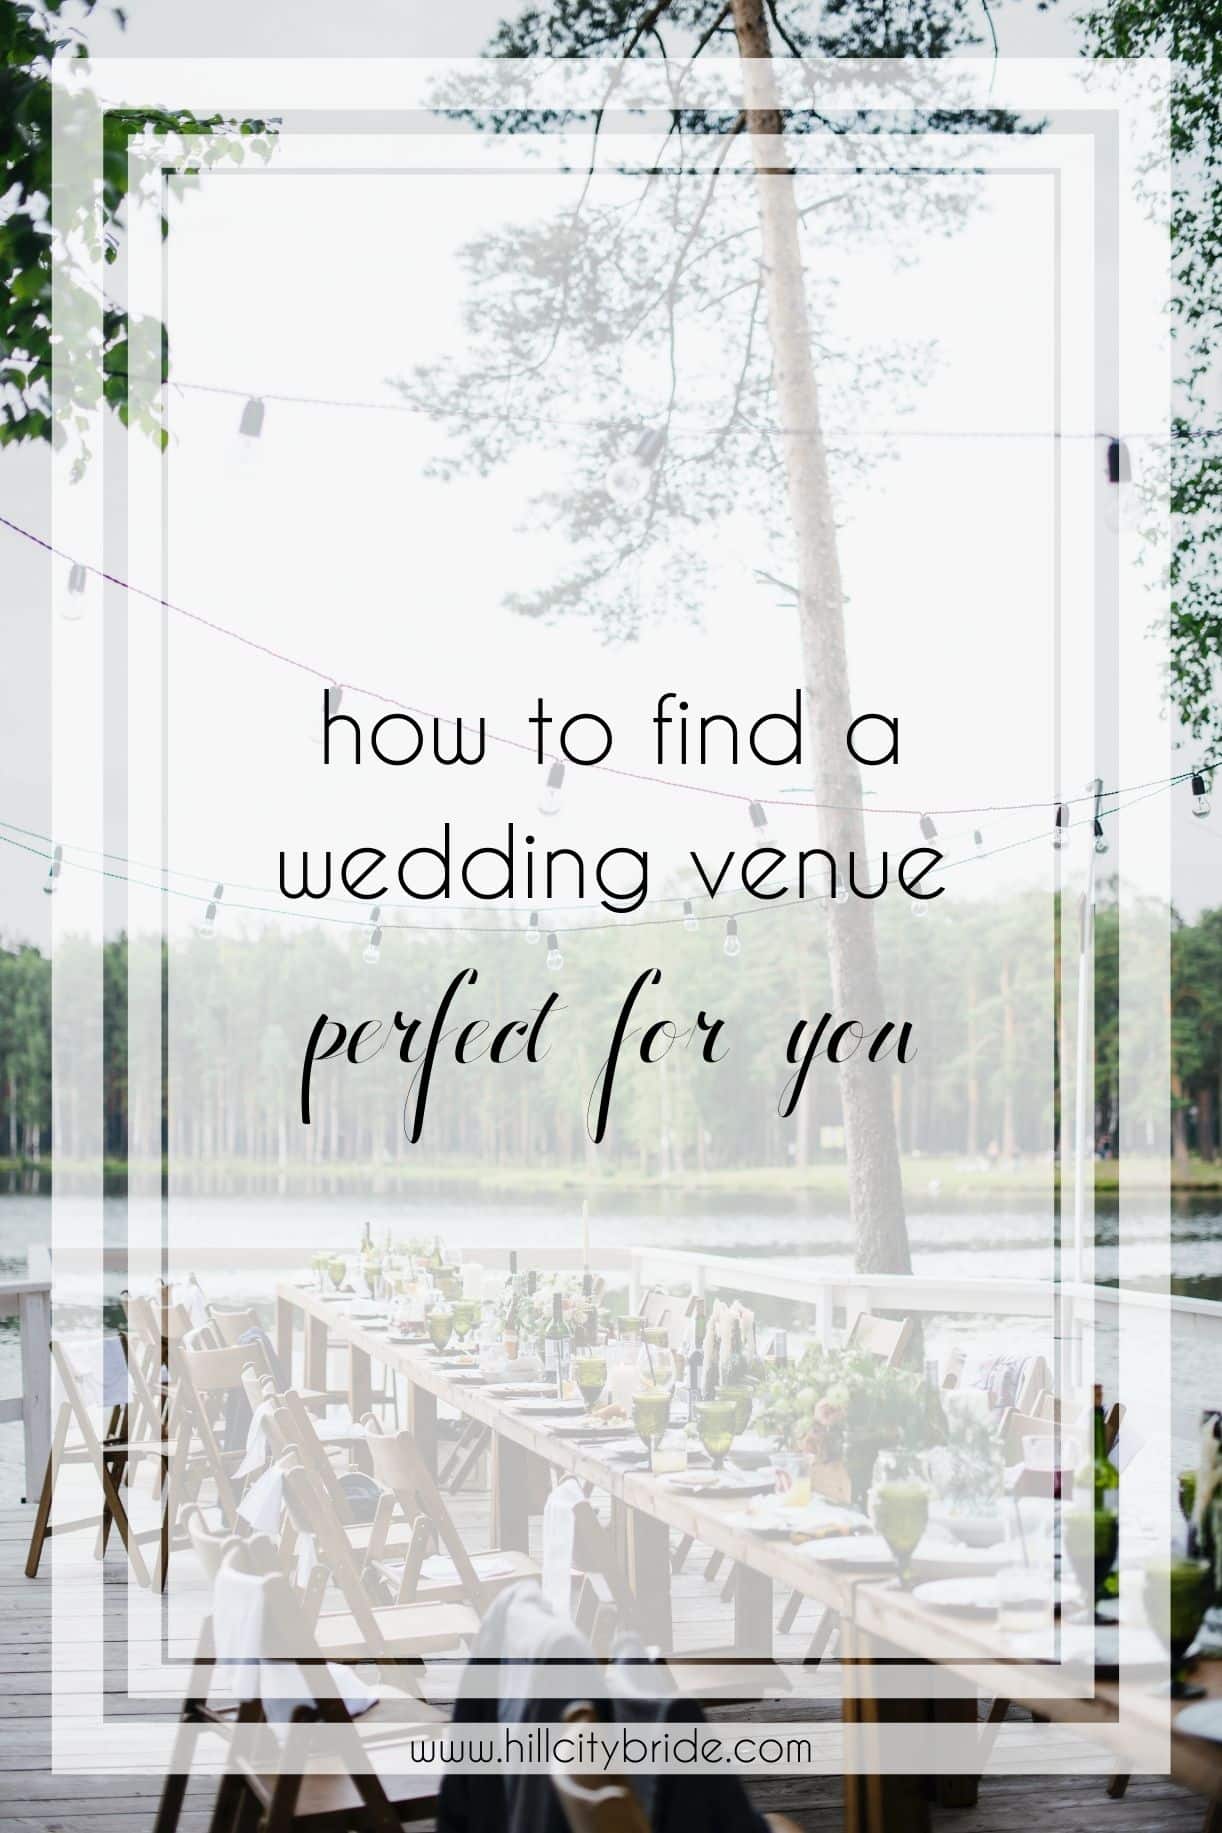 How to Find Wedding Venues | How to Choose a Wedding Venue